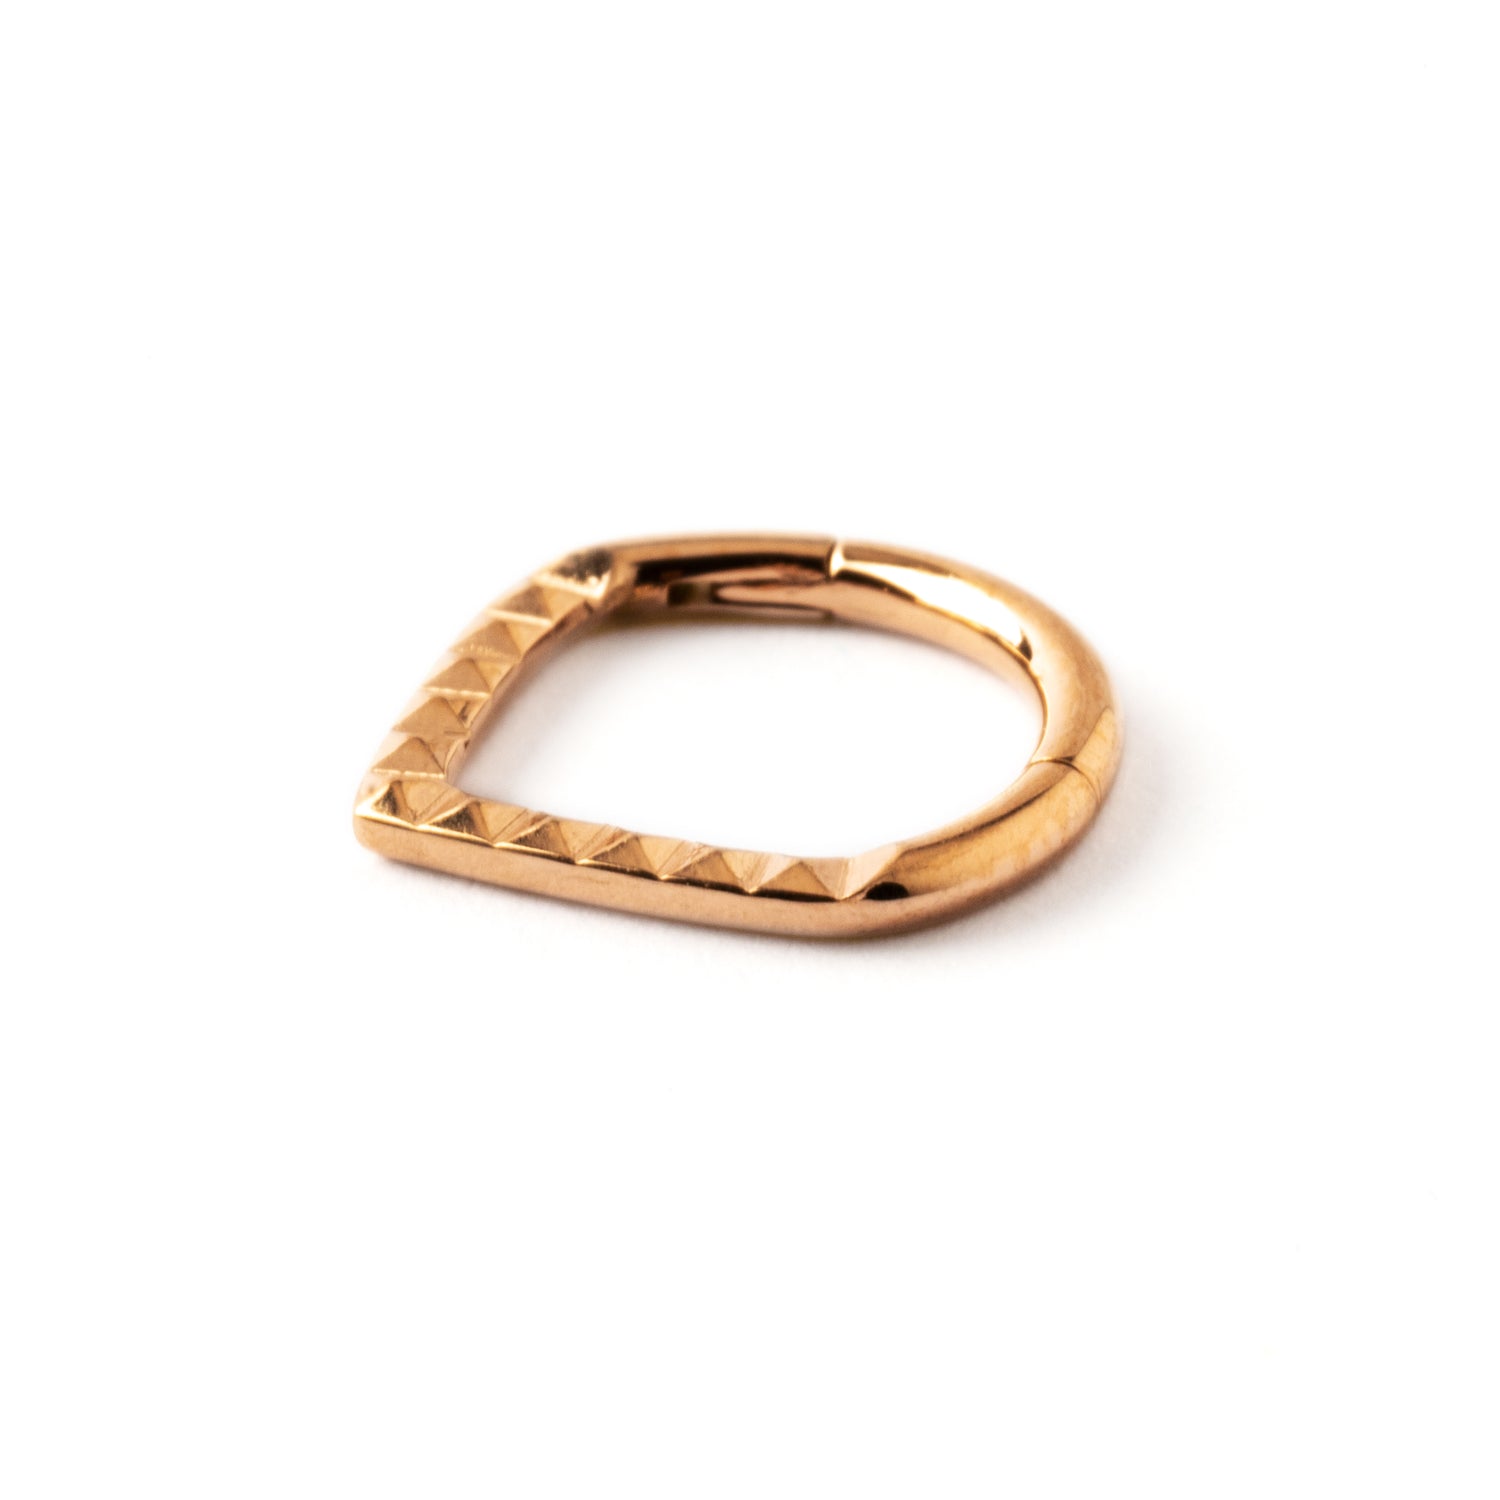 Giza rose gold surgical steel teardrop shaped septum clicker side view